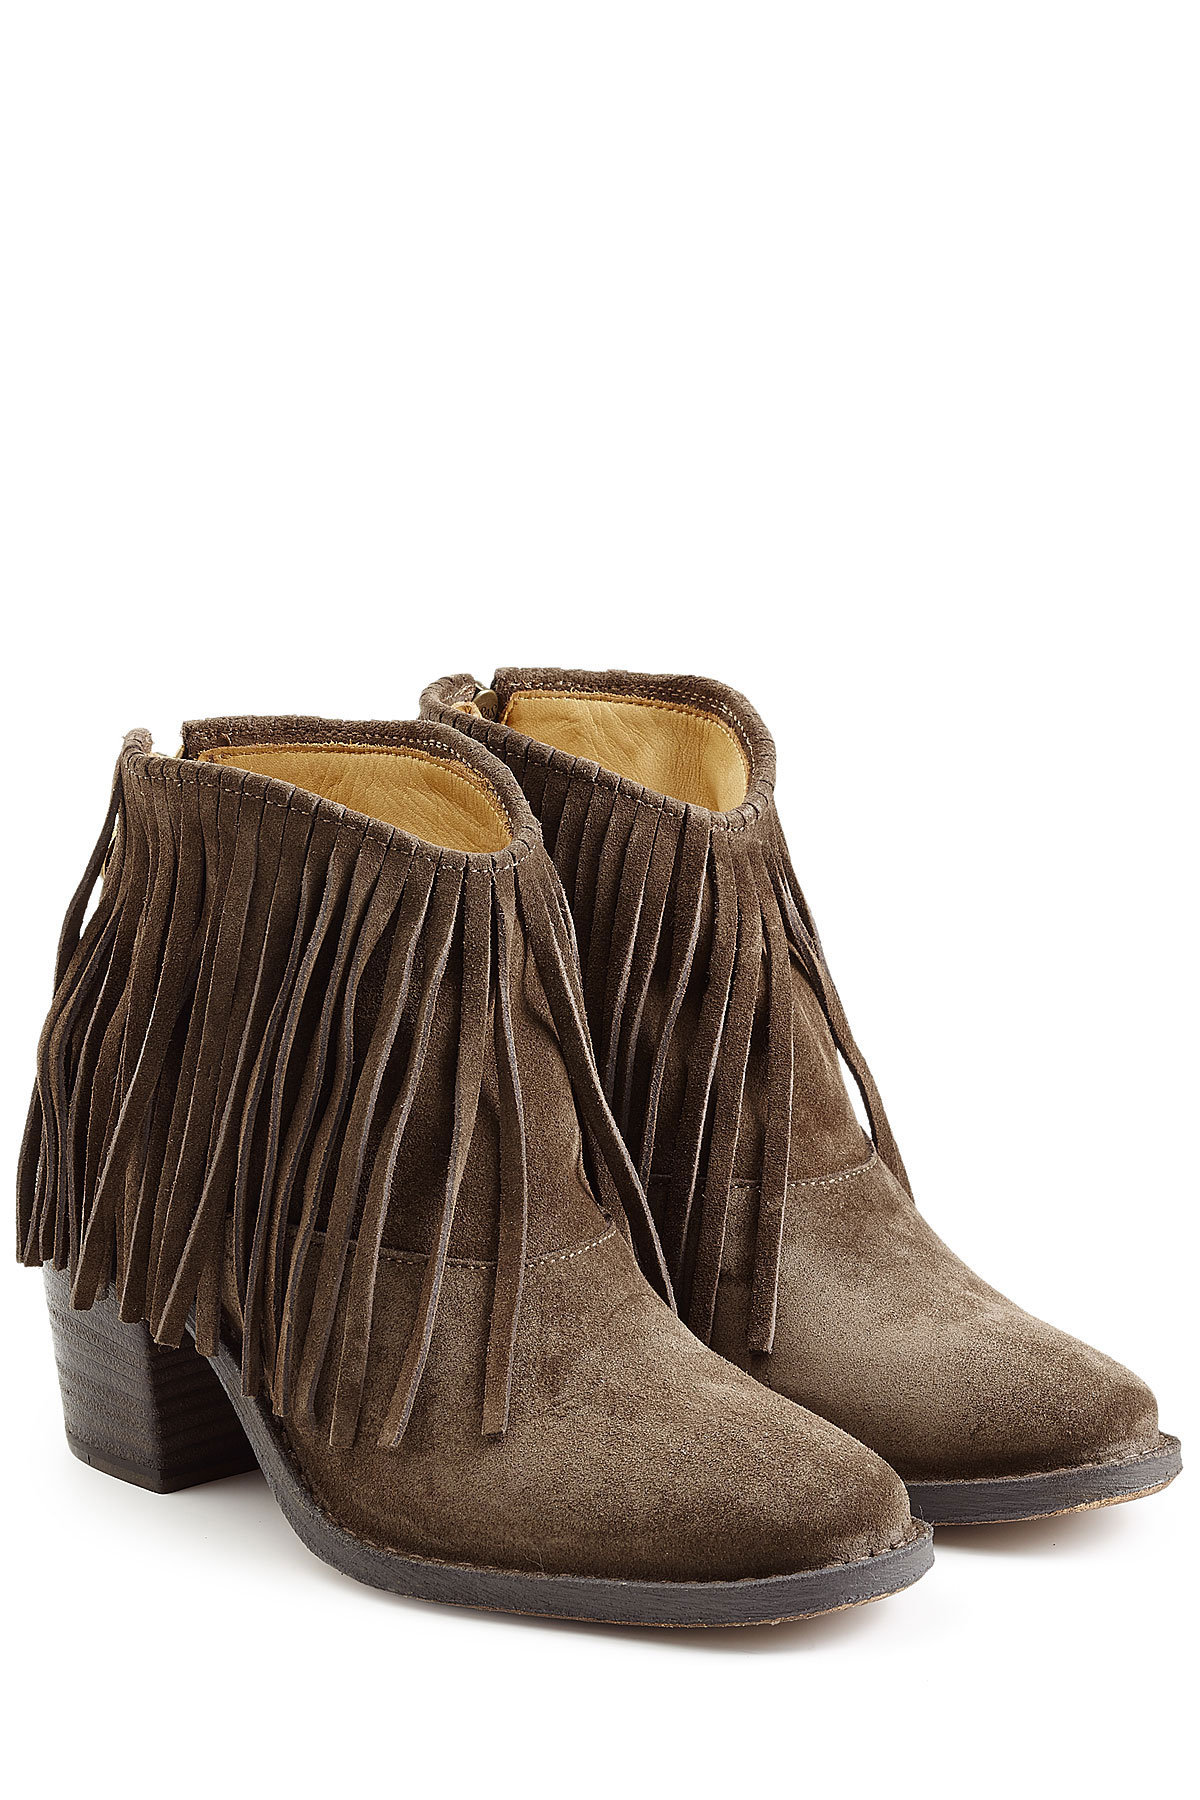 Fiorentini + Baker - Ramones Fringed Suede Ankle Boots